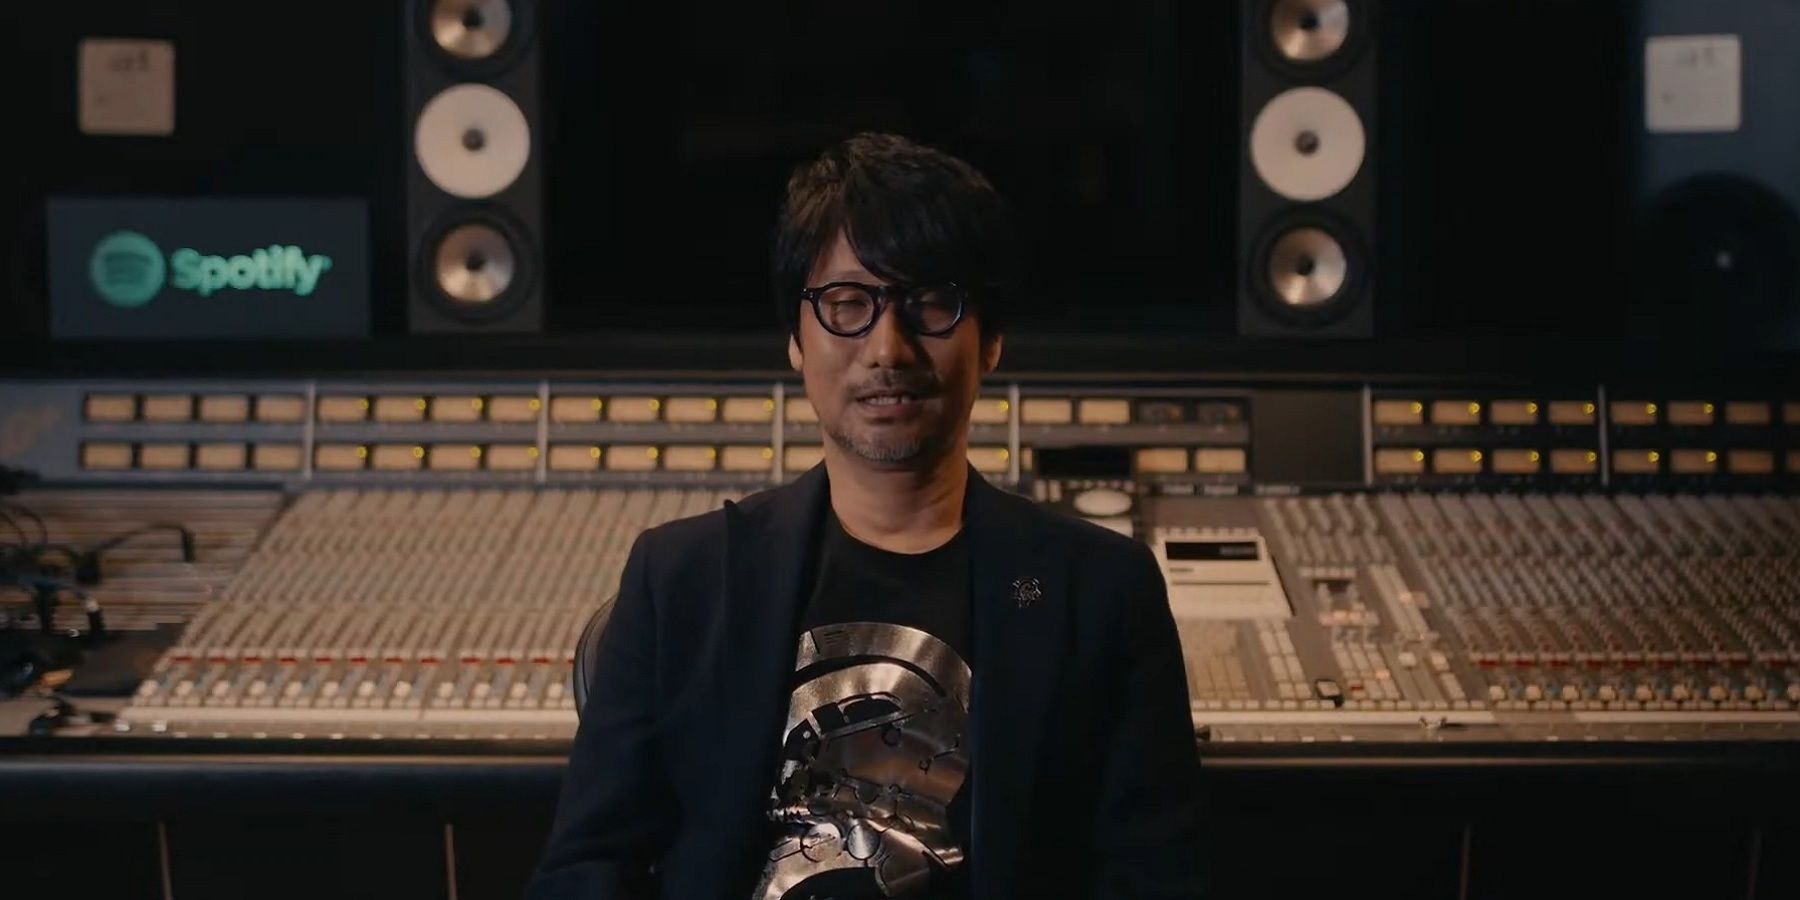 An image of Hideo Kojima sat in front of a studio mixing desk.